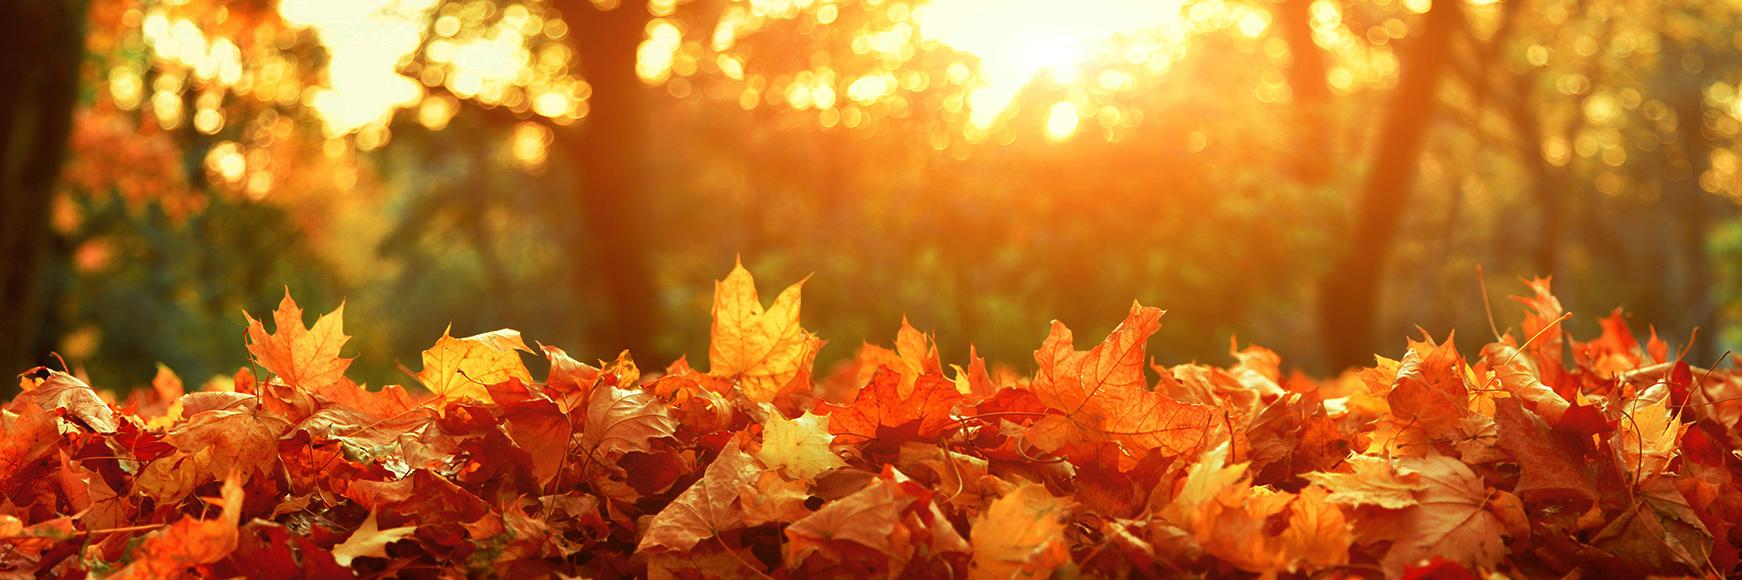 Five activities to try on an Autumn Day | OS GetOutside